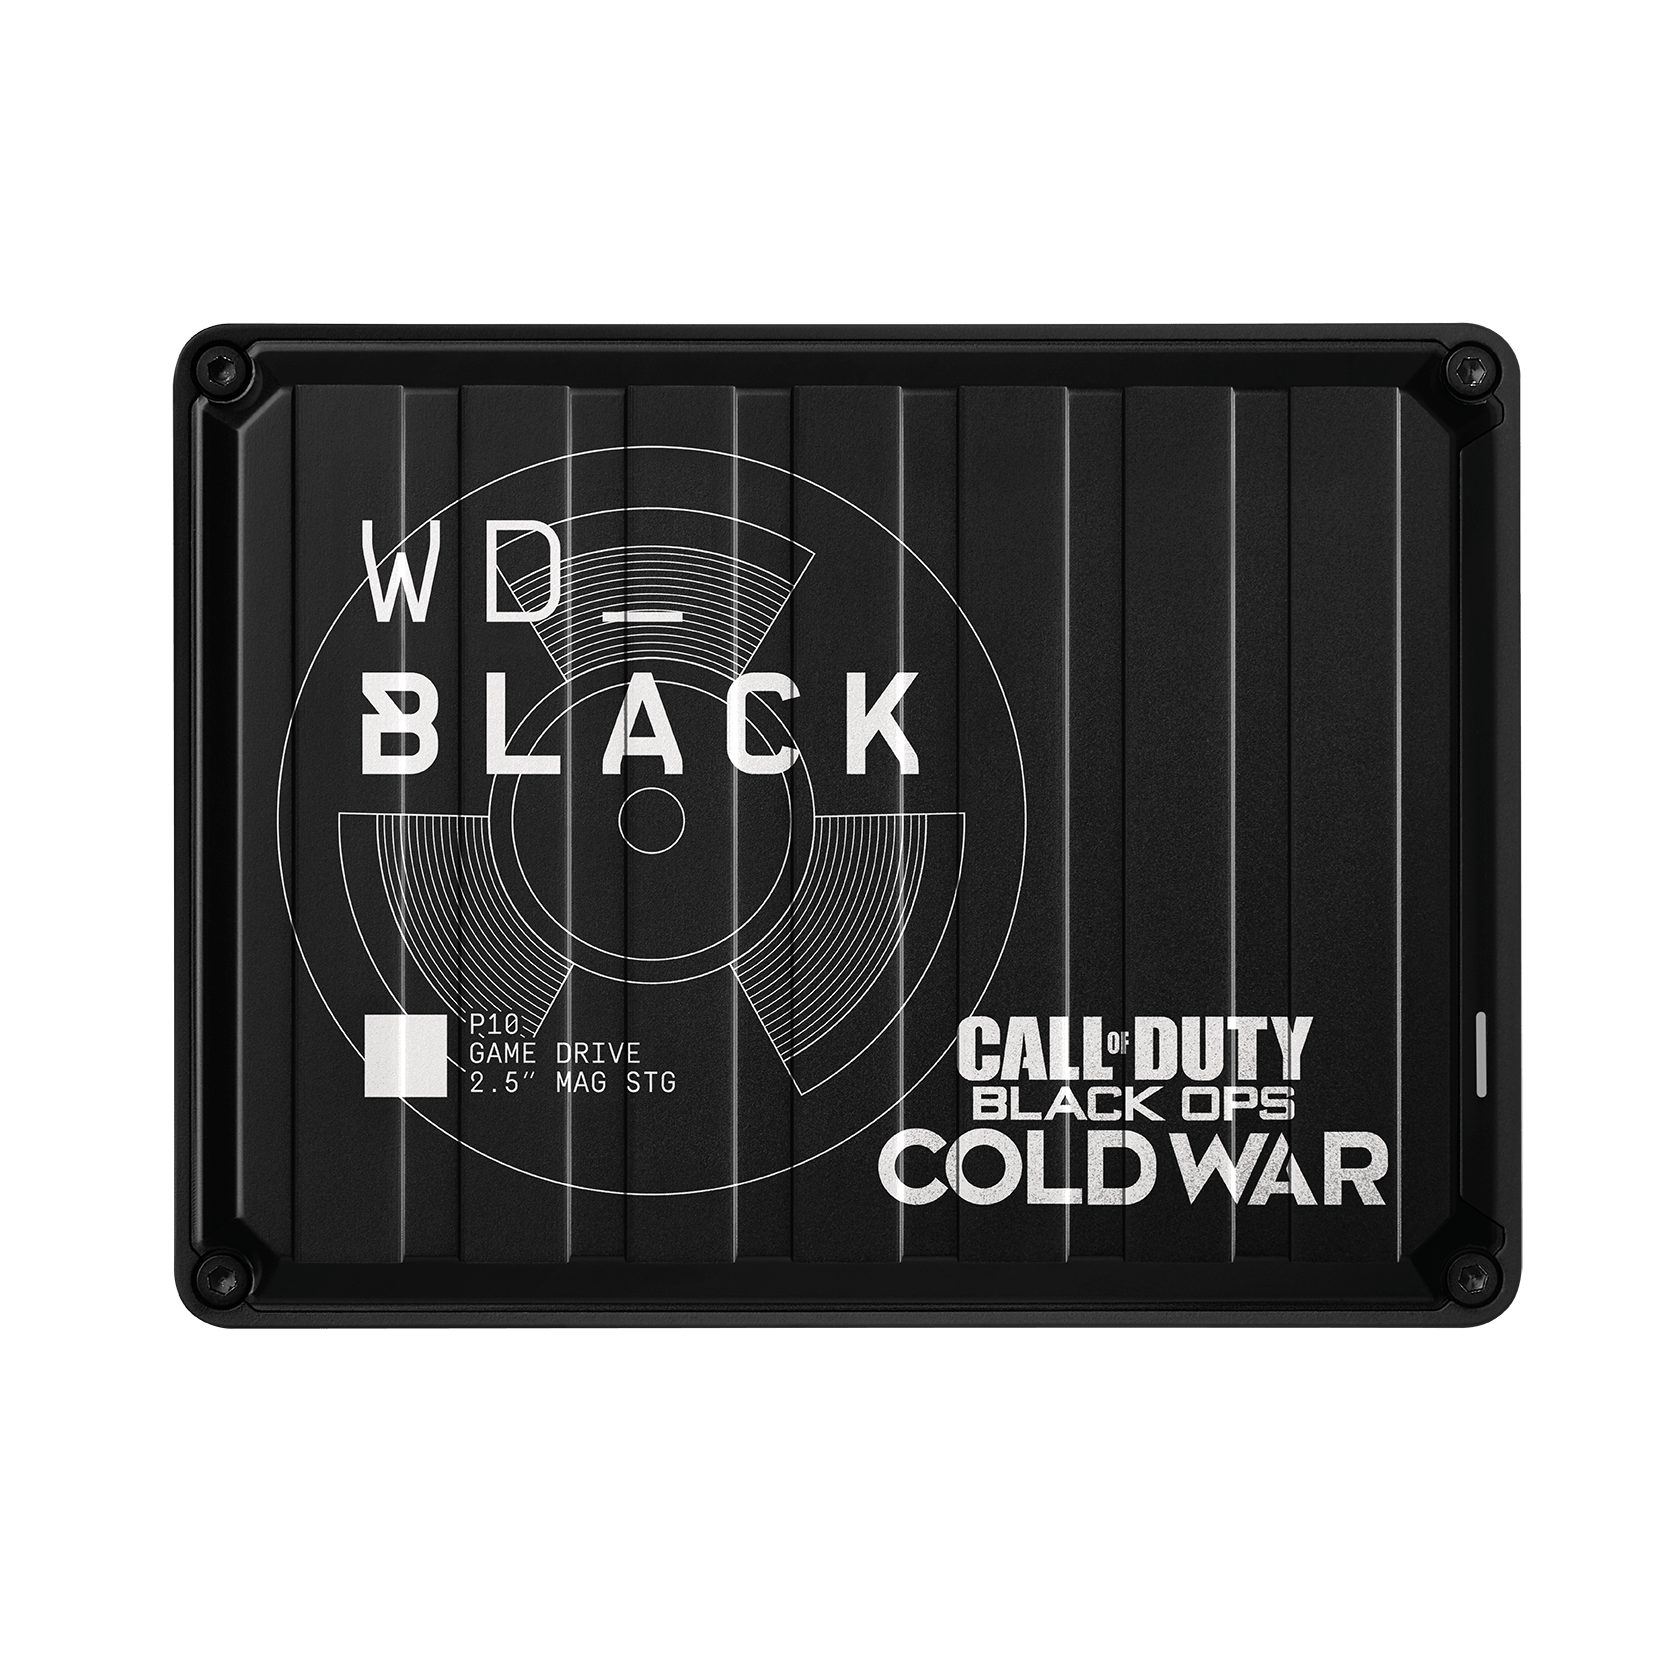 WD_BLACK™ Call Of Duty®: Black Ops Cold War Special Edition P10 Game Drive